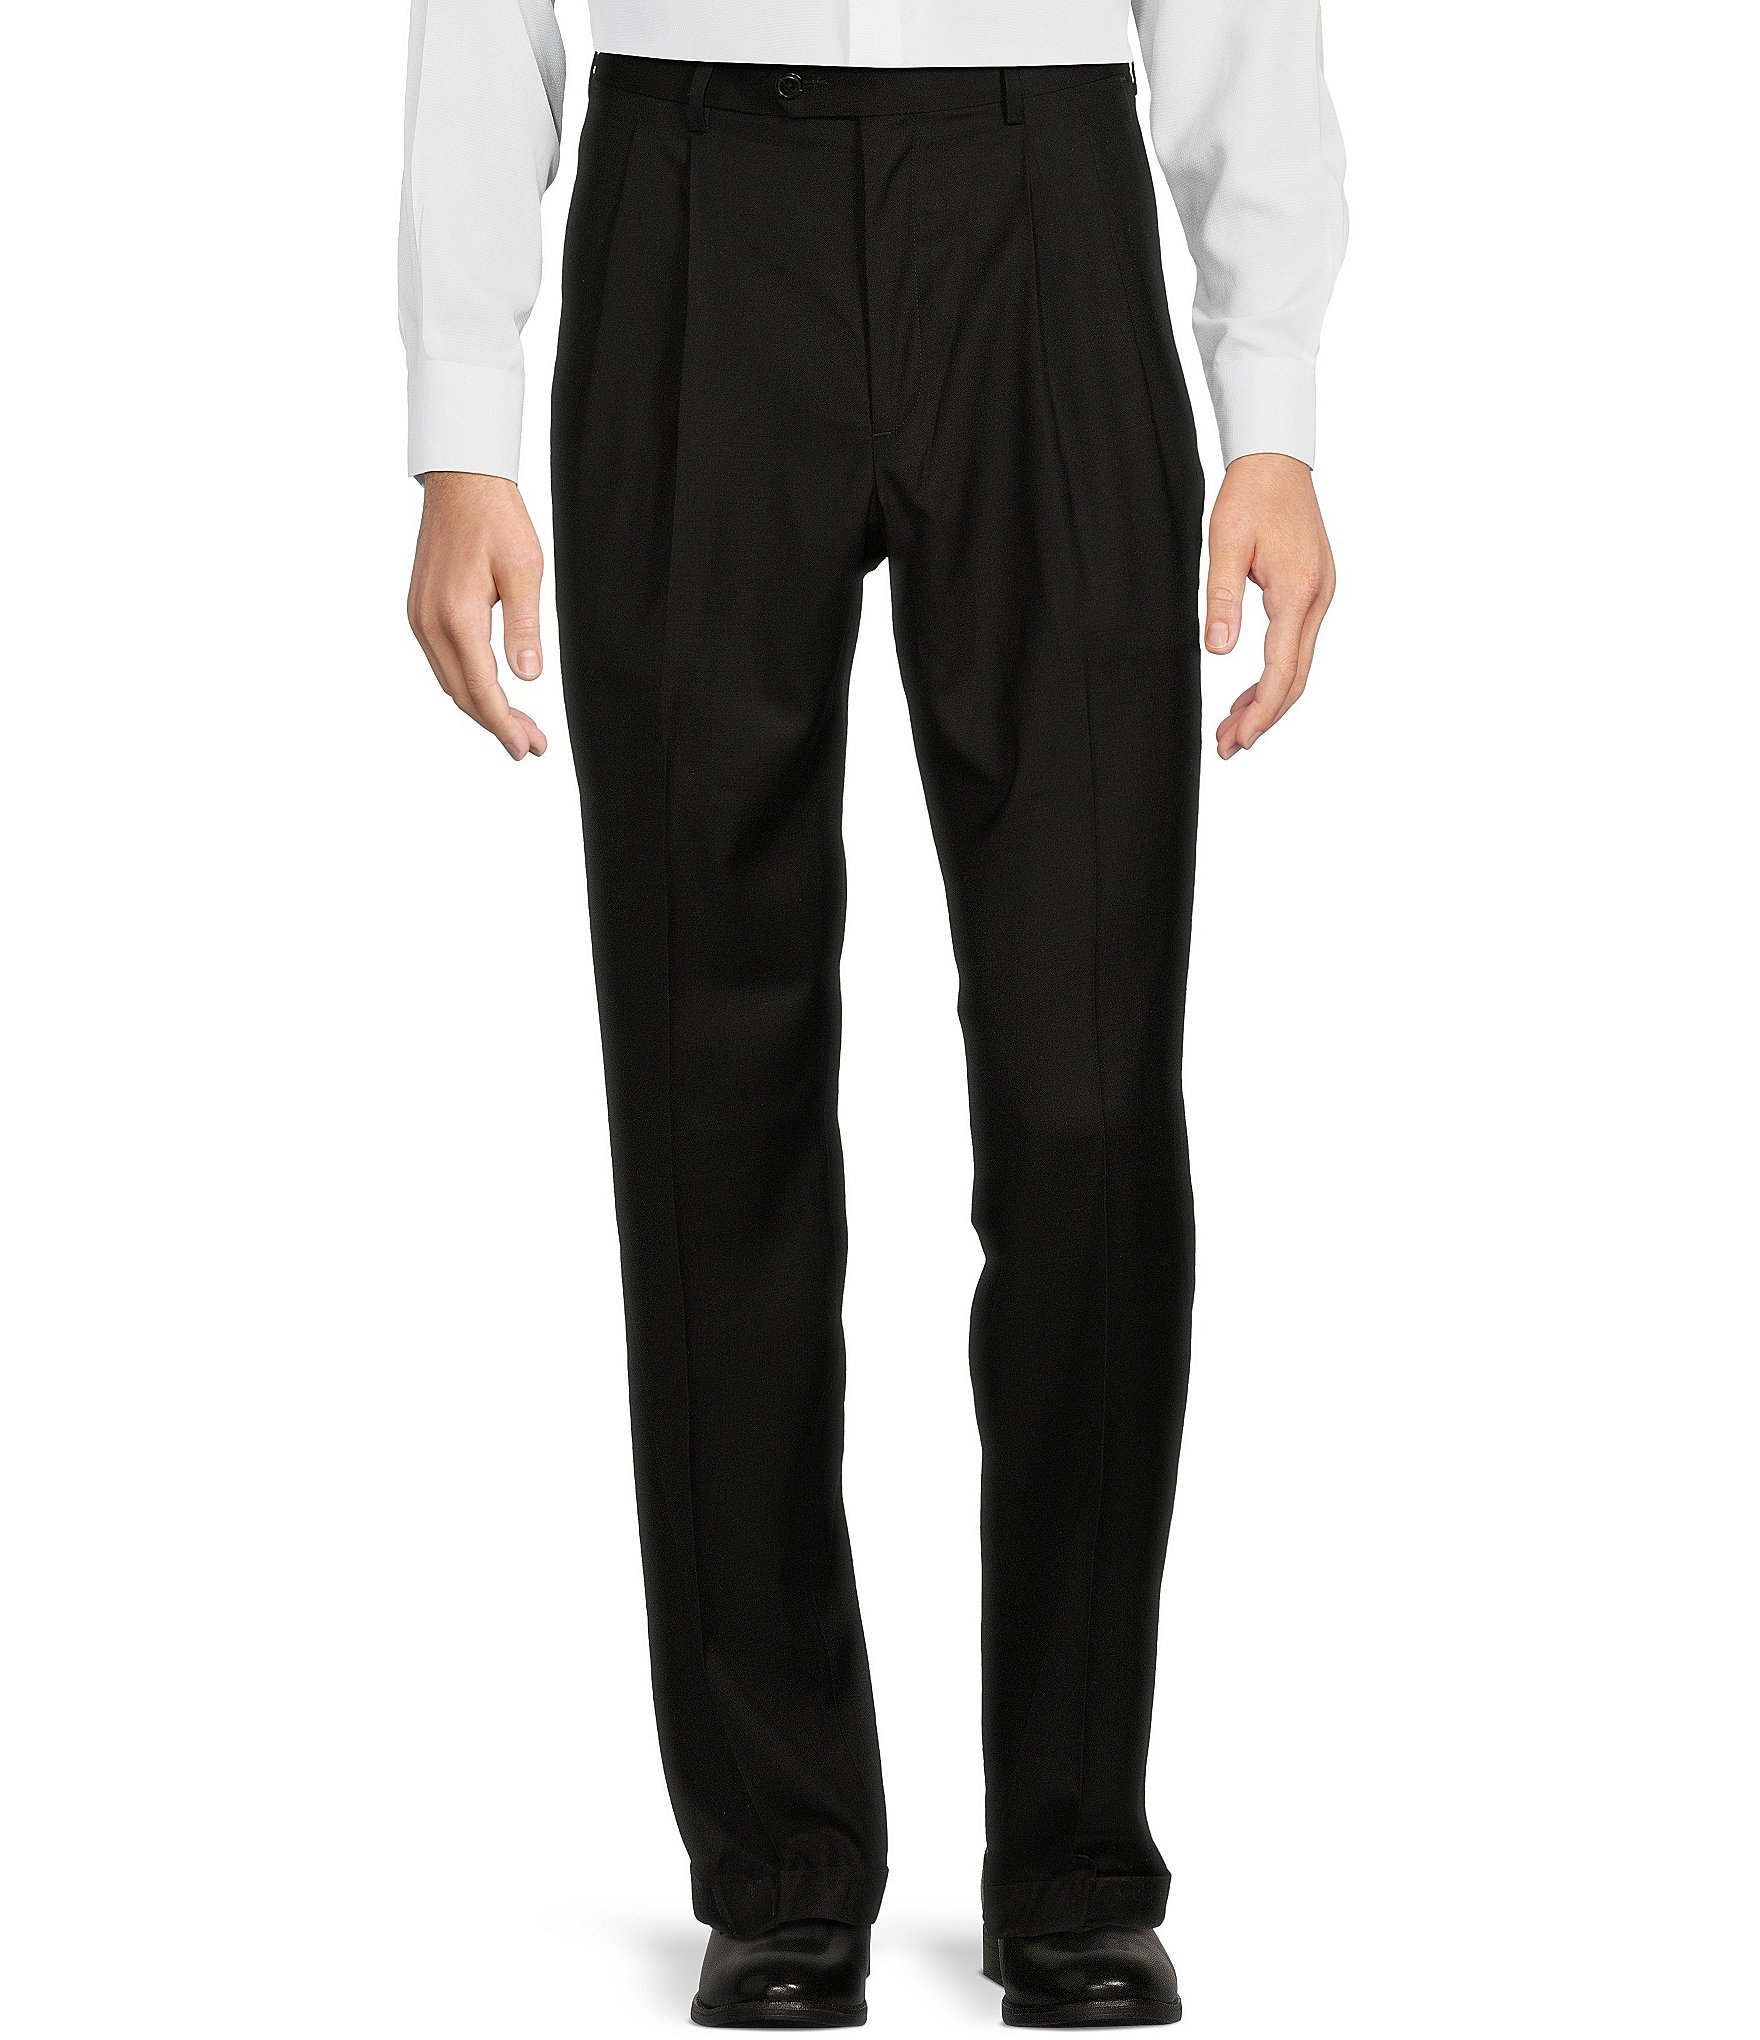 Big and Tall Baggy Cuffed Dacron Polyester Dress Pants